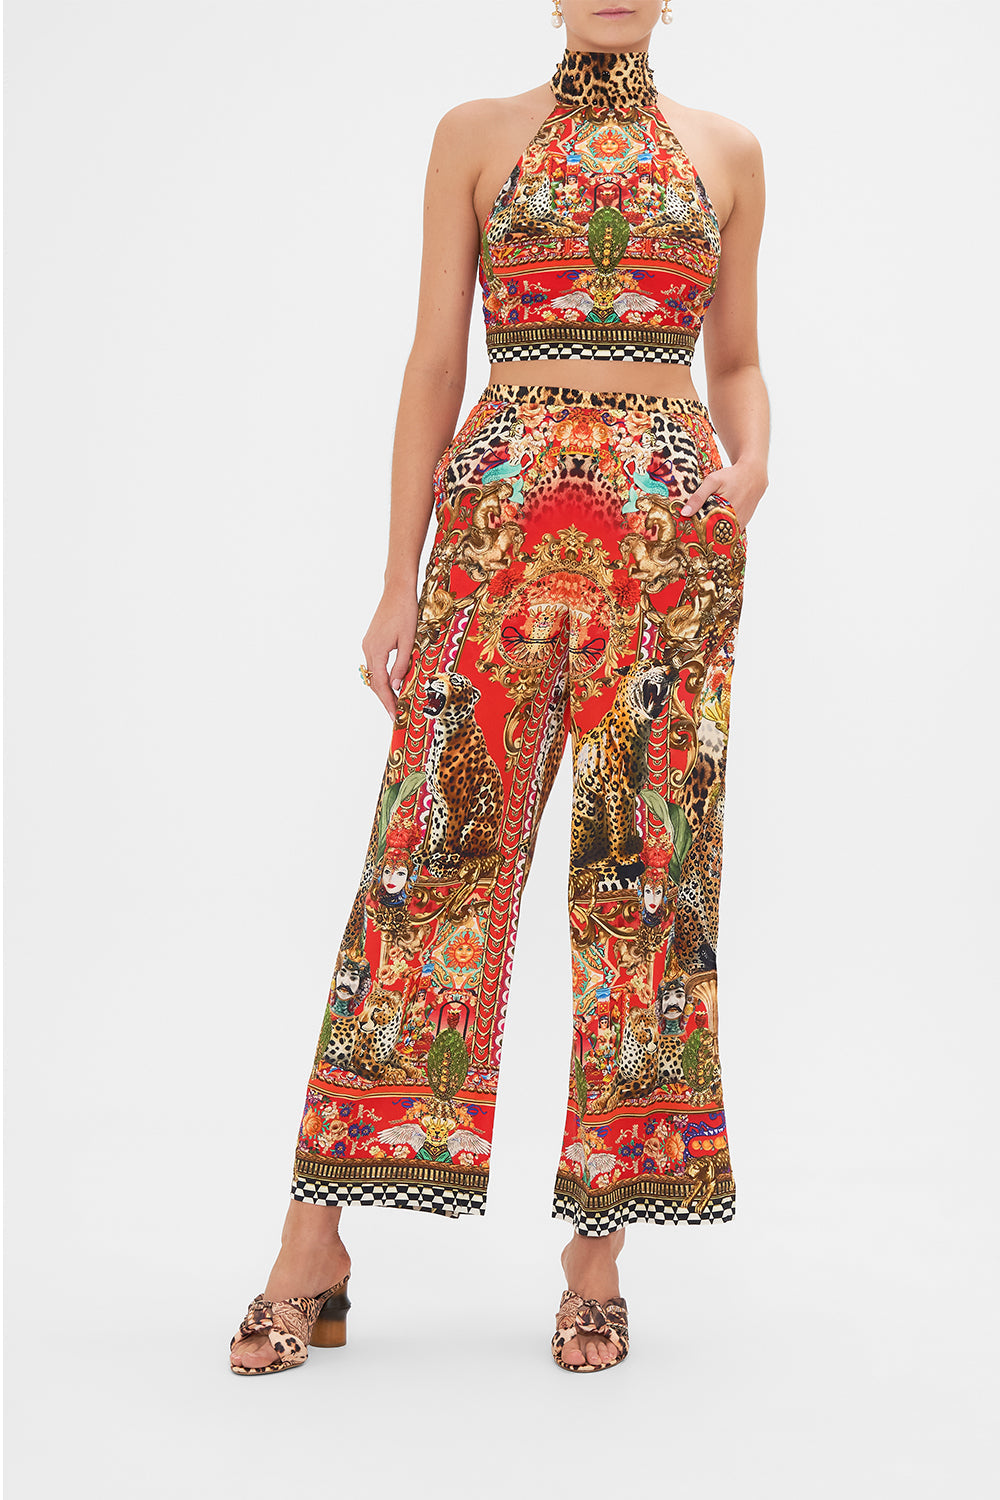 Front view of model wearing CAMILLA silk wide leg pant in From Generation to Generation print